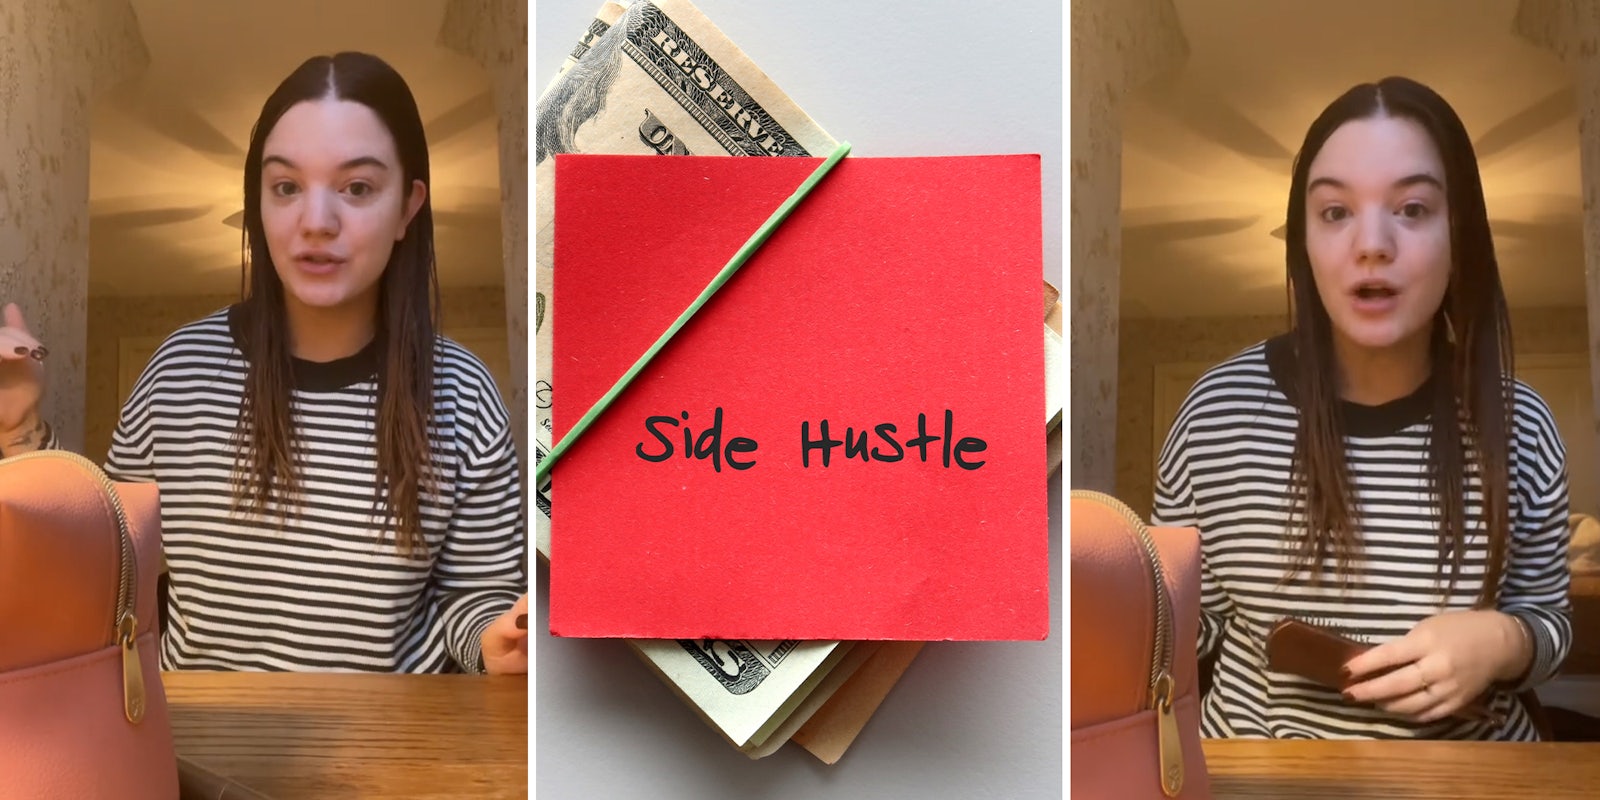 side hustle expert reveals how much she makes taking surveys from Prolific and Focus online—and how you can get started